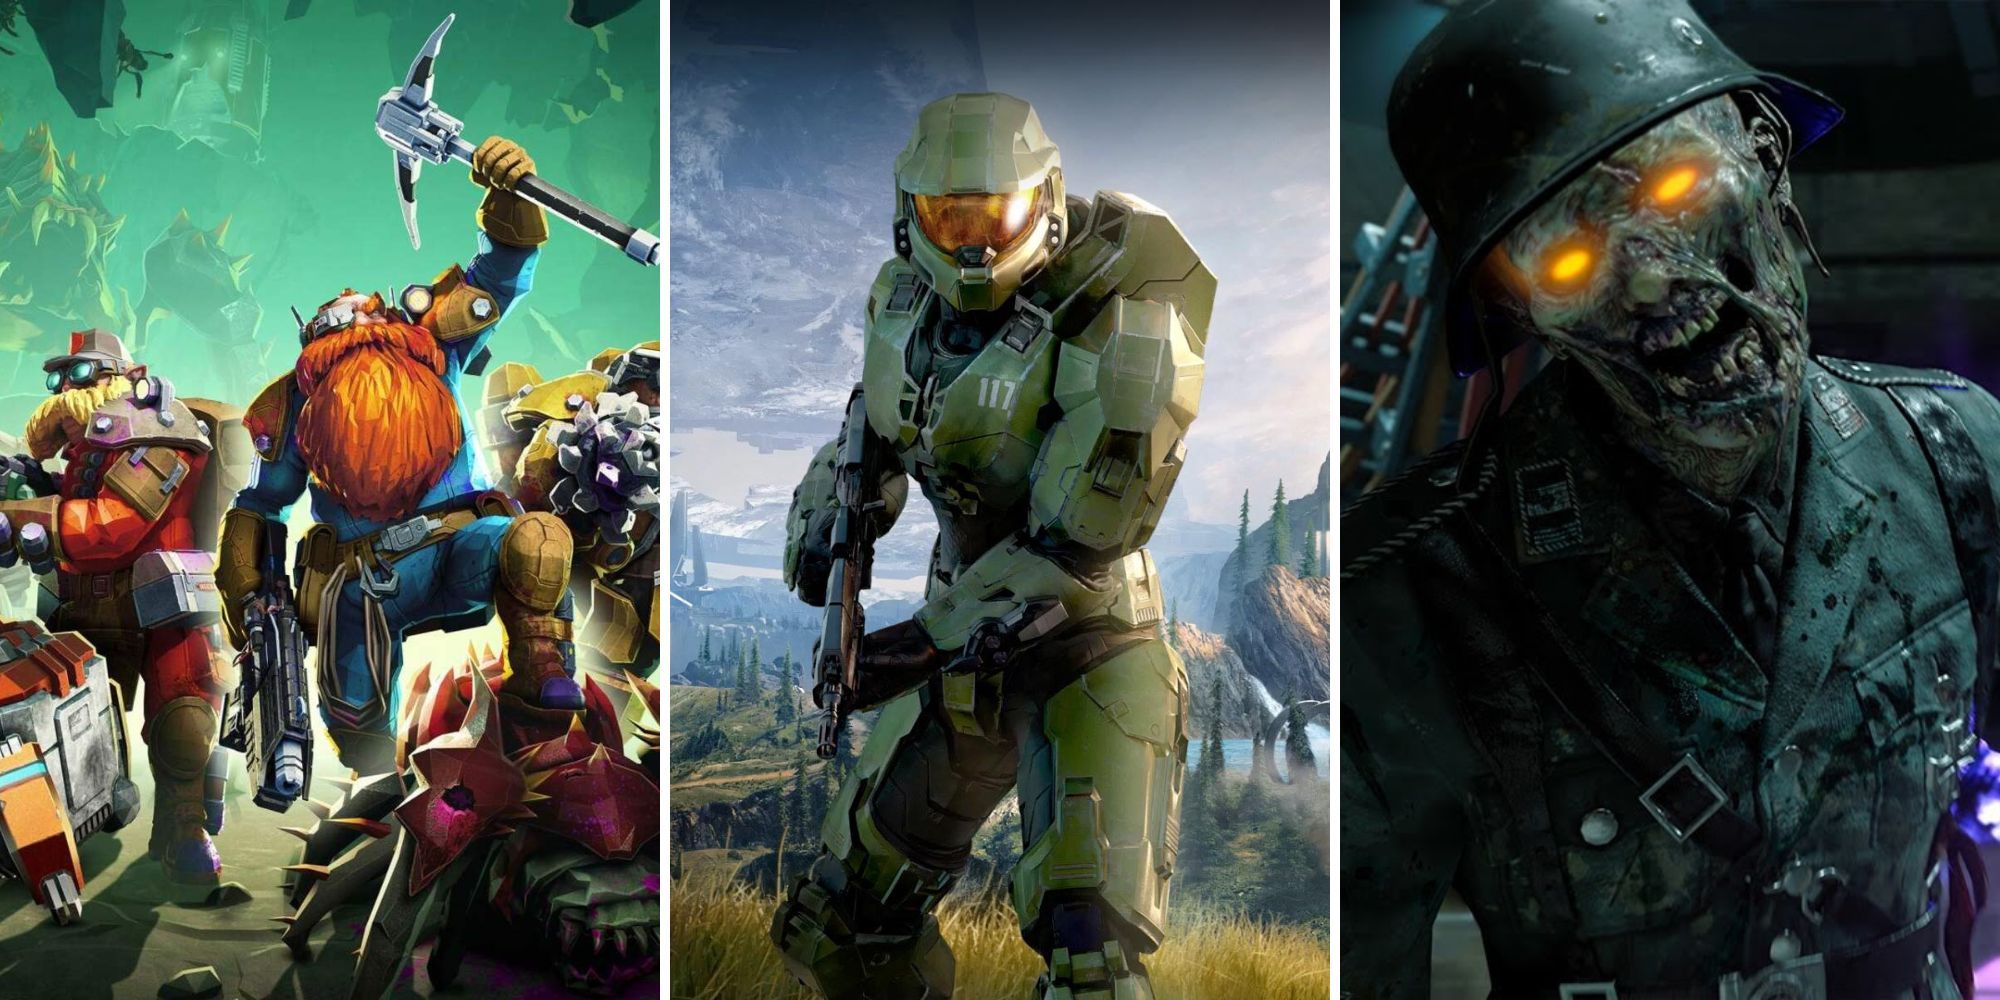 Collage of the Best Co-Op First-Person Shooters (Deep Rock Galactic, Halo Infinite, Call of Duty: Zombies)